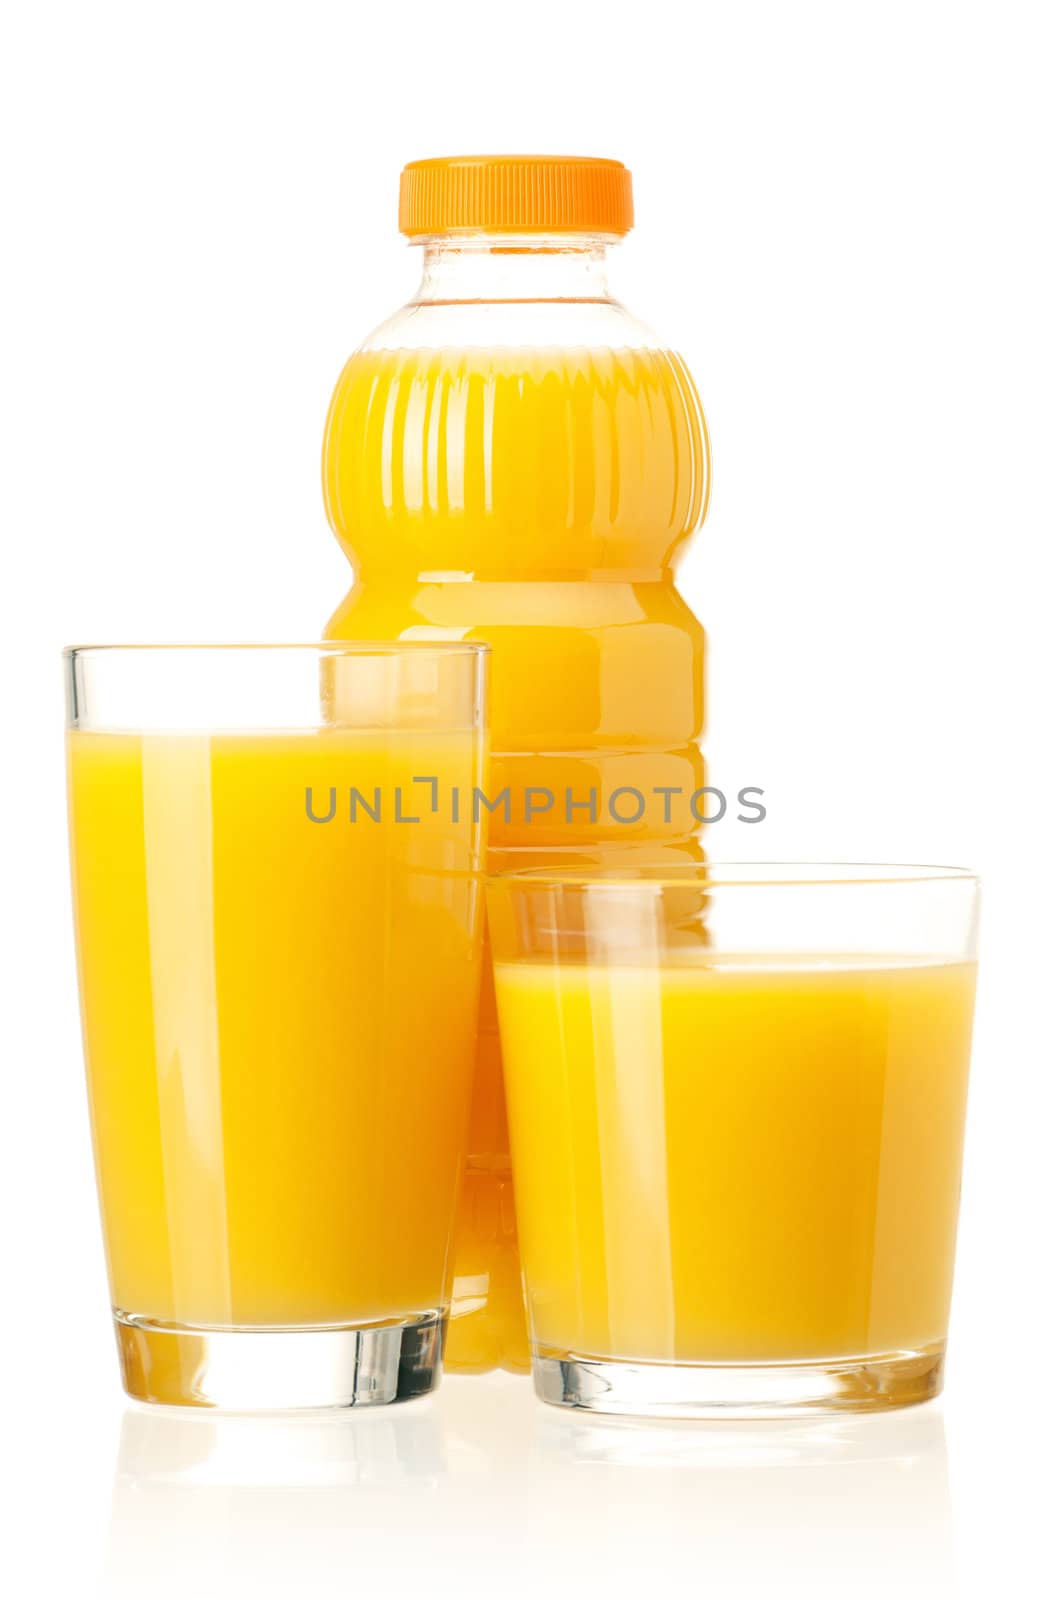 Orange juice in plastic bottle and glass on white background